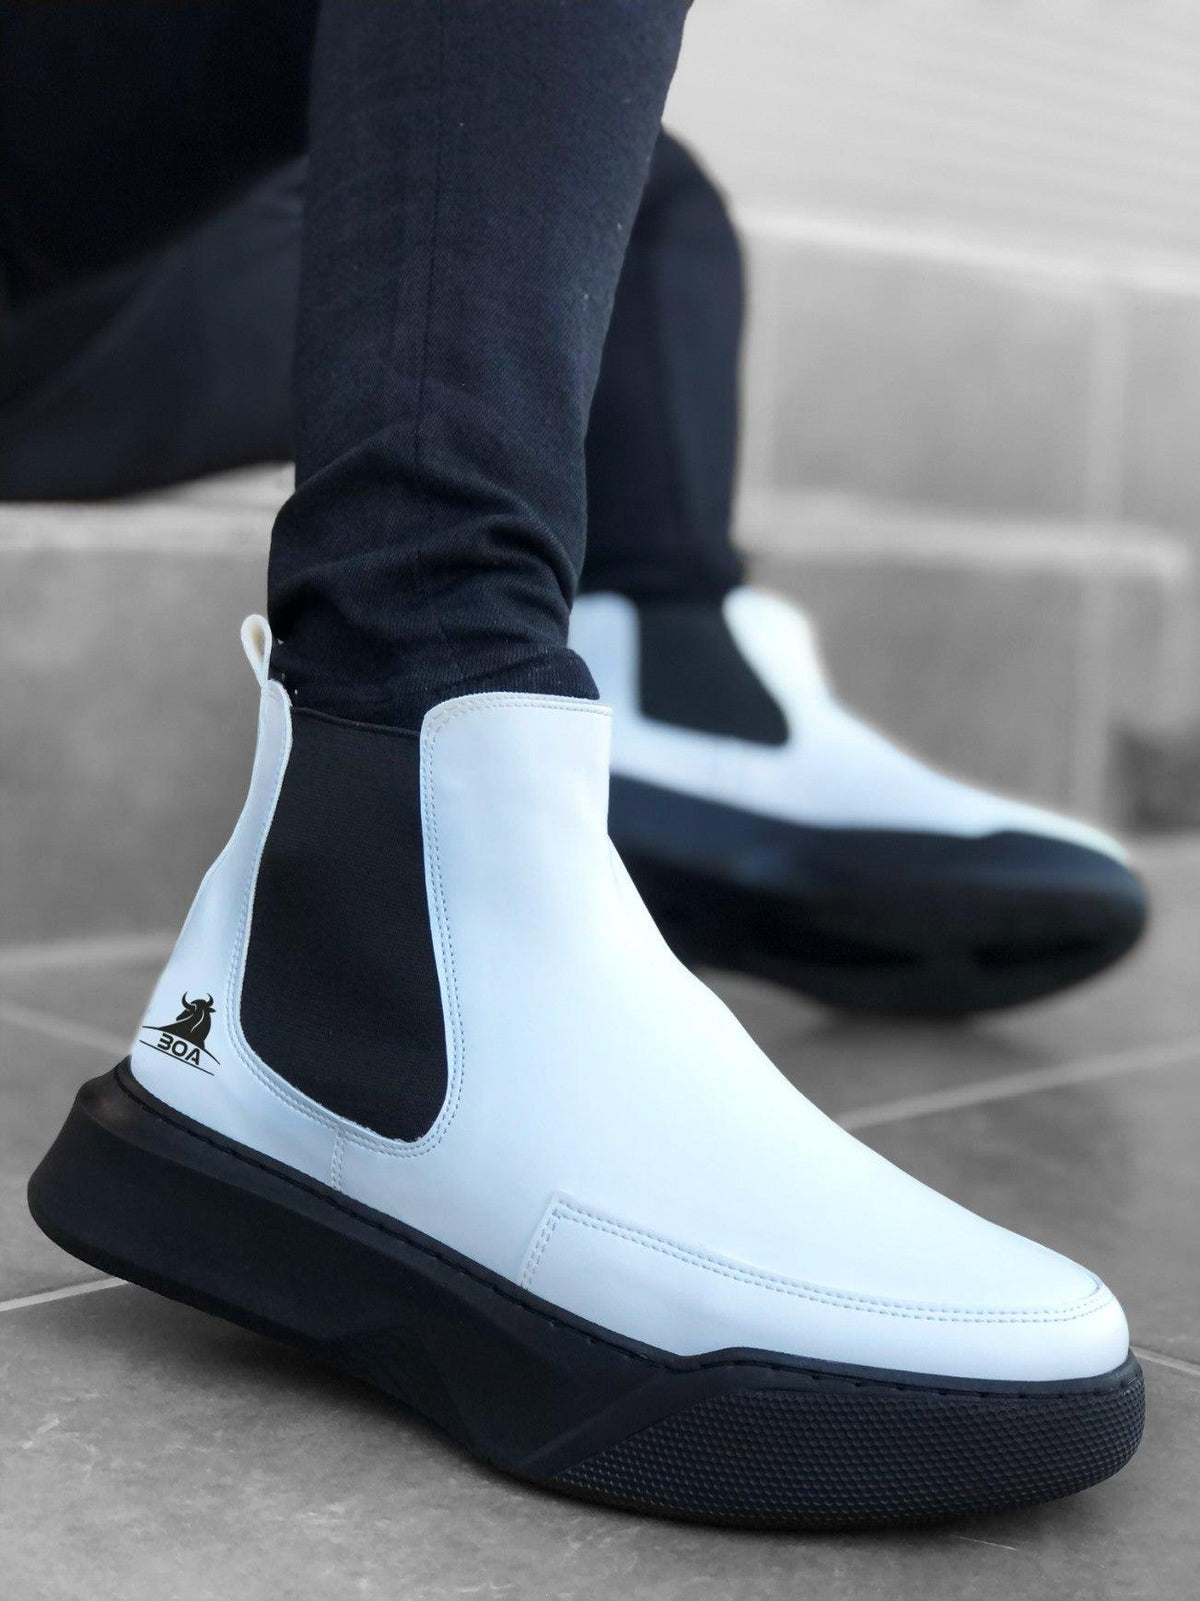 BA0150 Lace-Up Banded Men's High Sole White Black Sole Sport Boots - STREET MODE ™